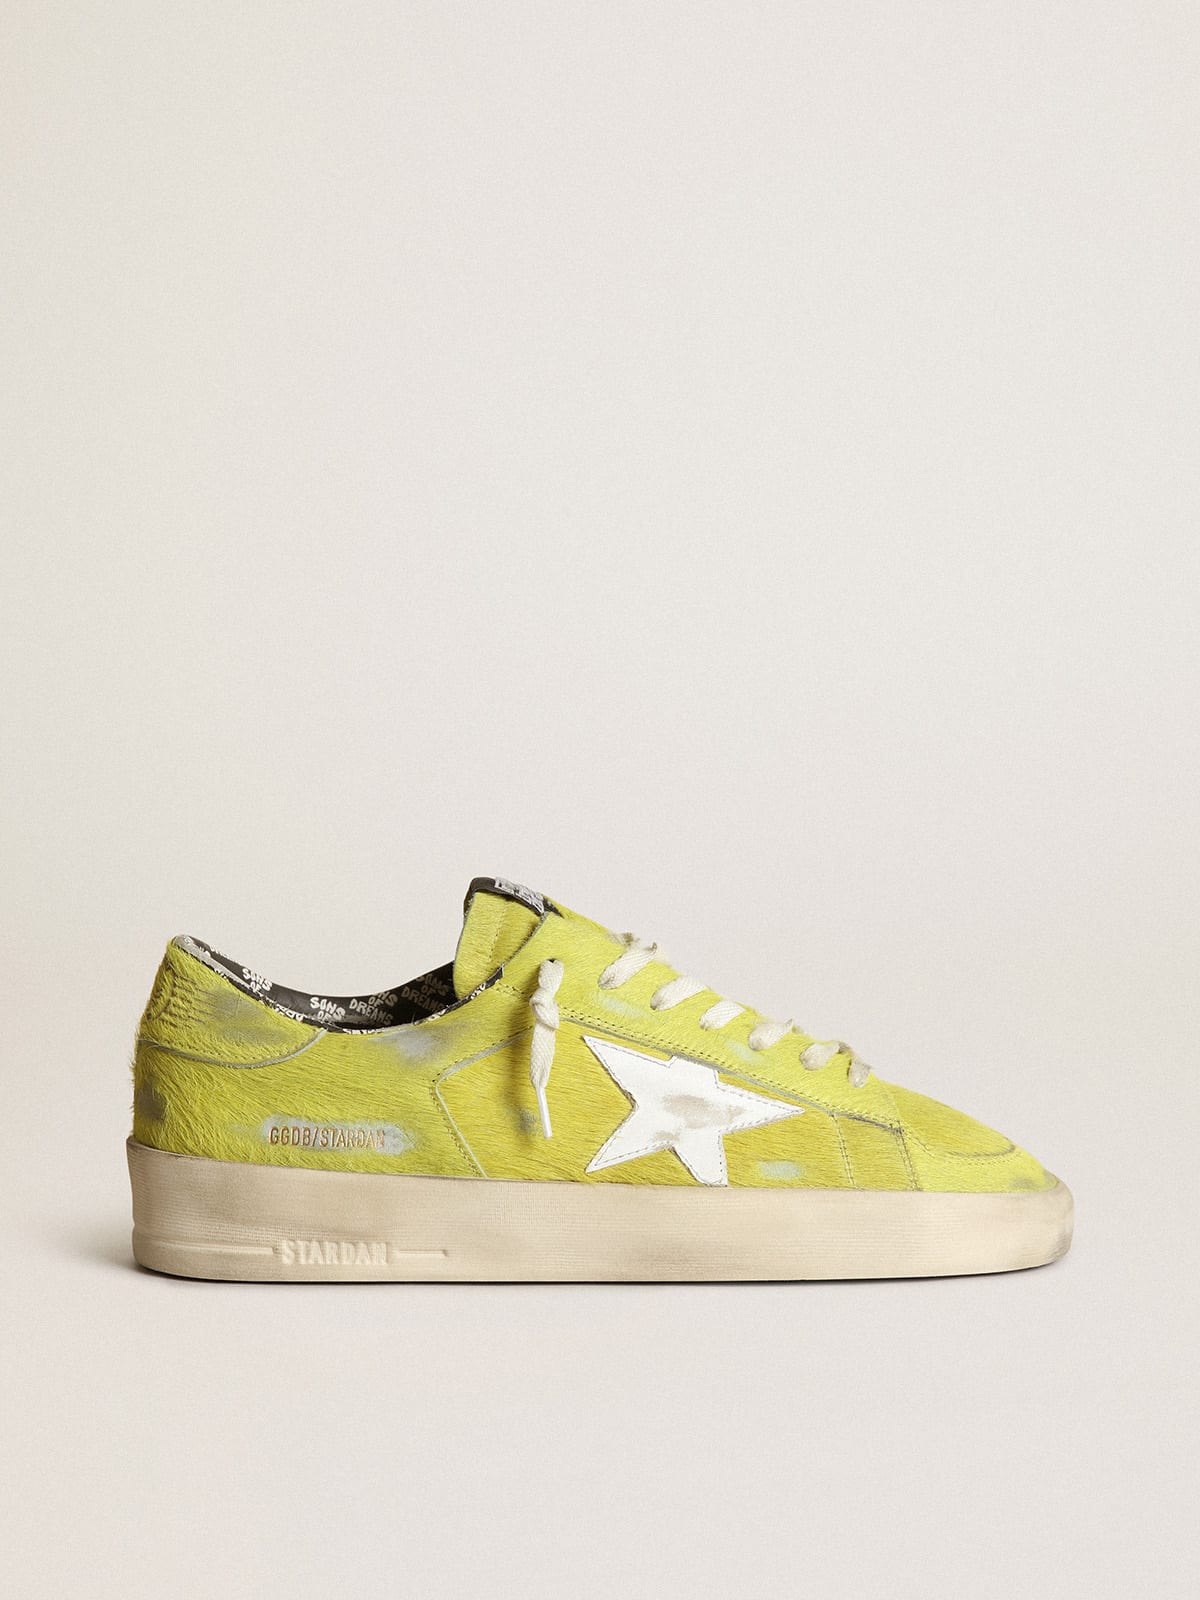 Men's Stardan sneakers in fluorescent yellow pony skin with white leather star